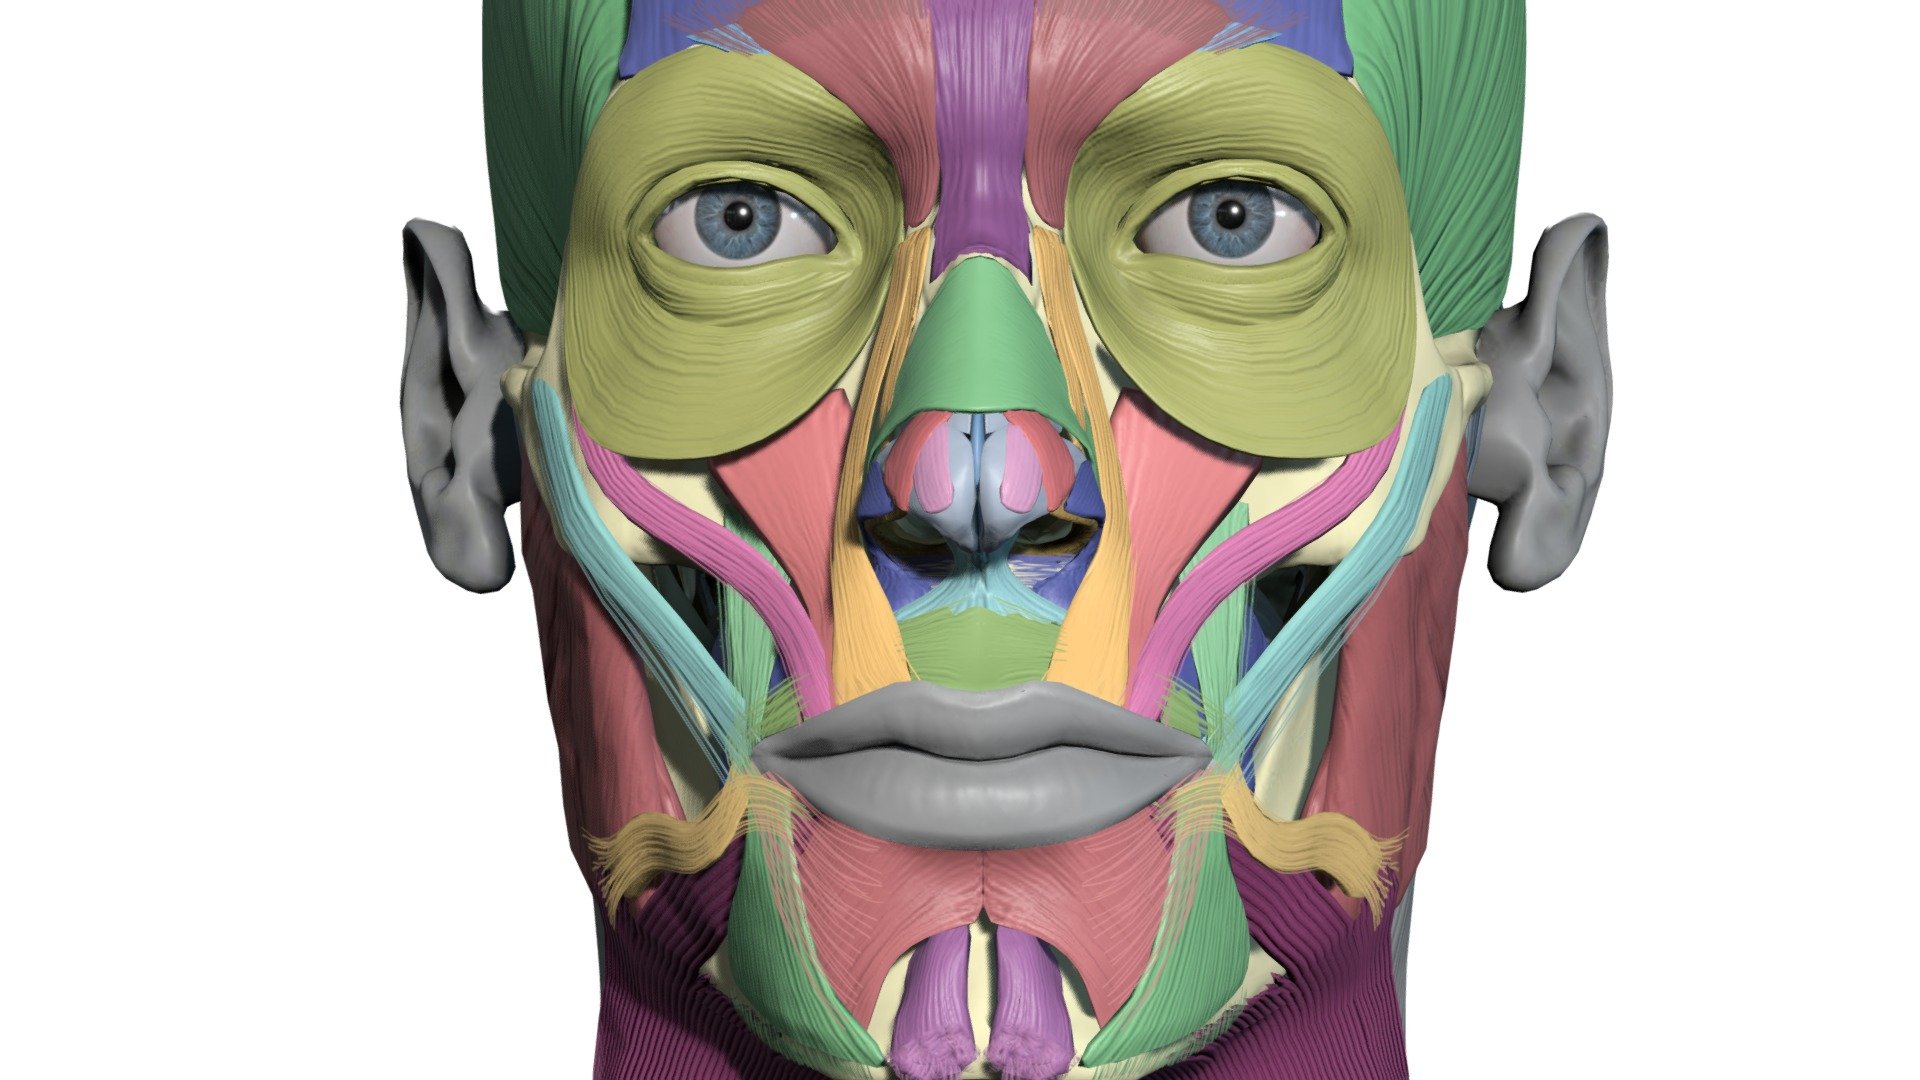 www.anatomy.app

https://anatomy4sculptors.com/art/

Colourcoded muscles of the head 3d model